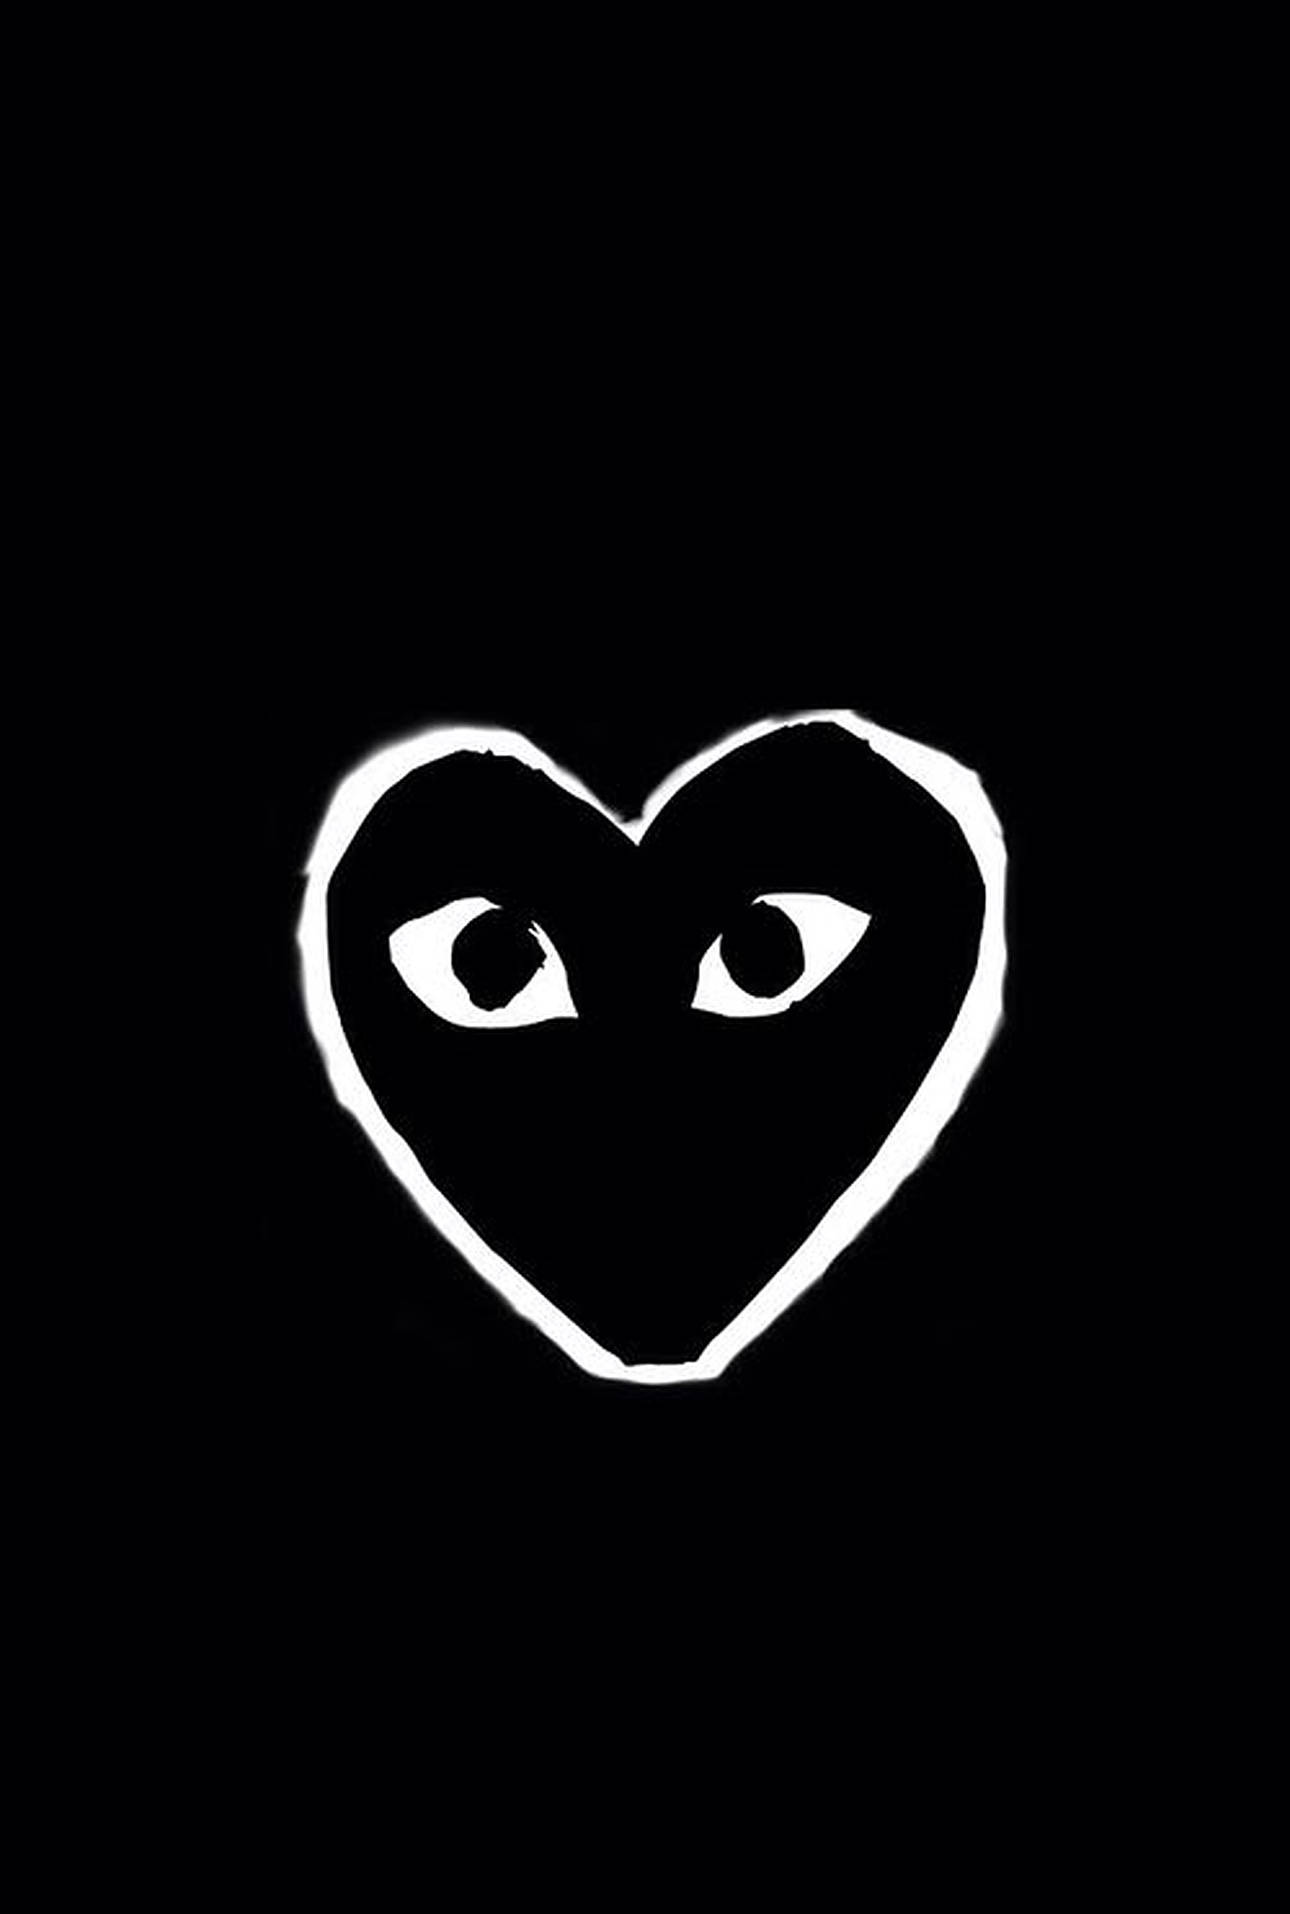 Cdg Black And White Background